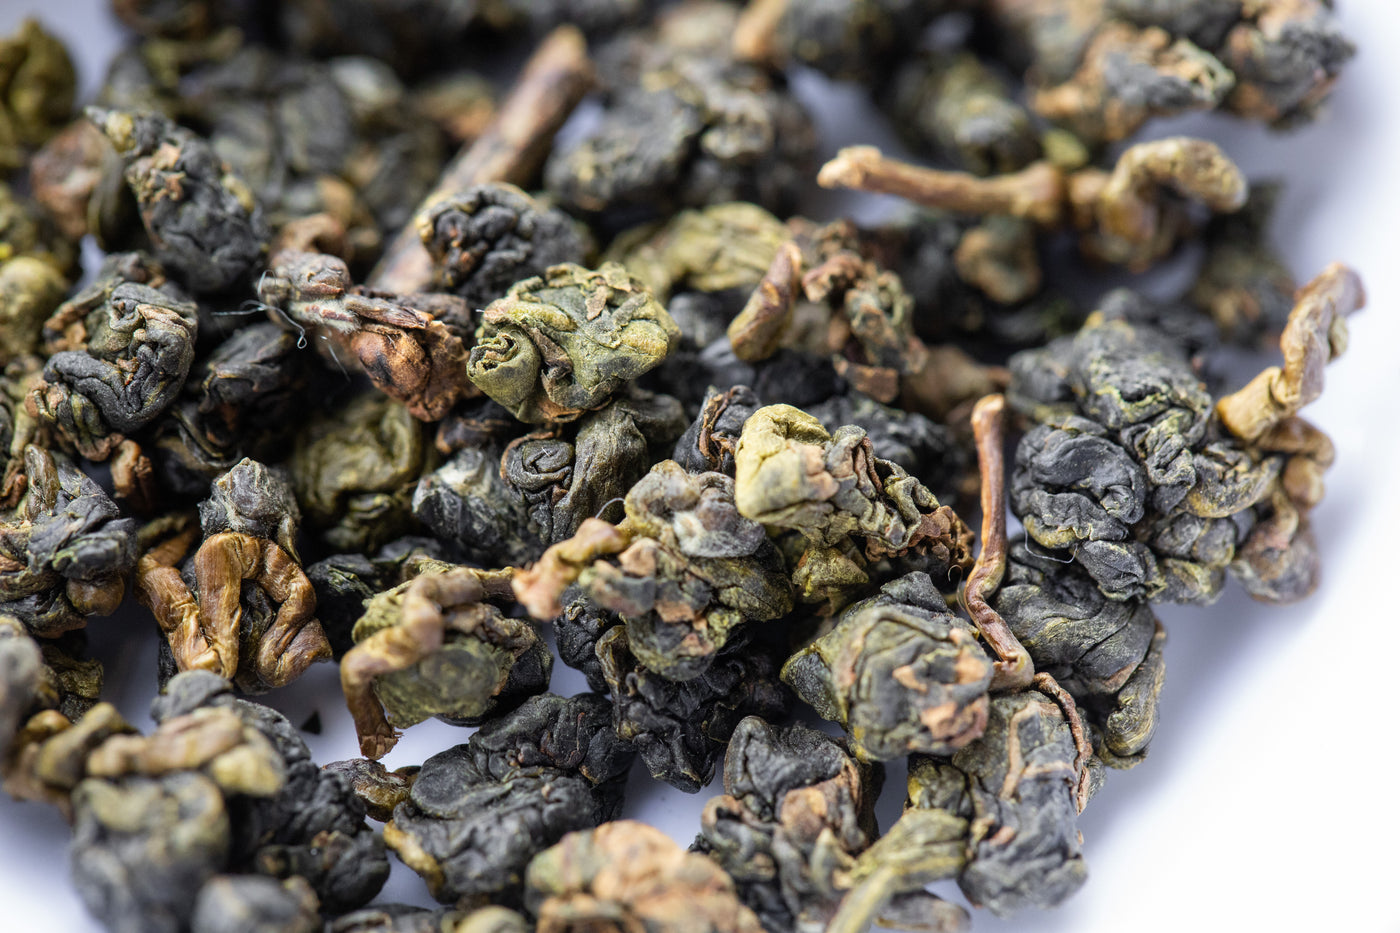 Up close view of rolled oolong tea to show clumped, hand rolled texture.